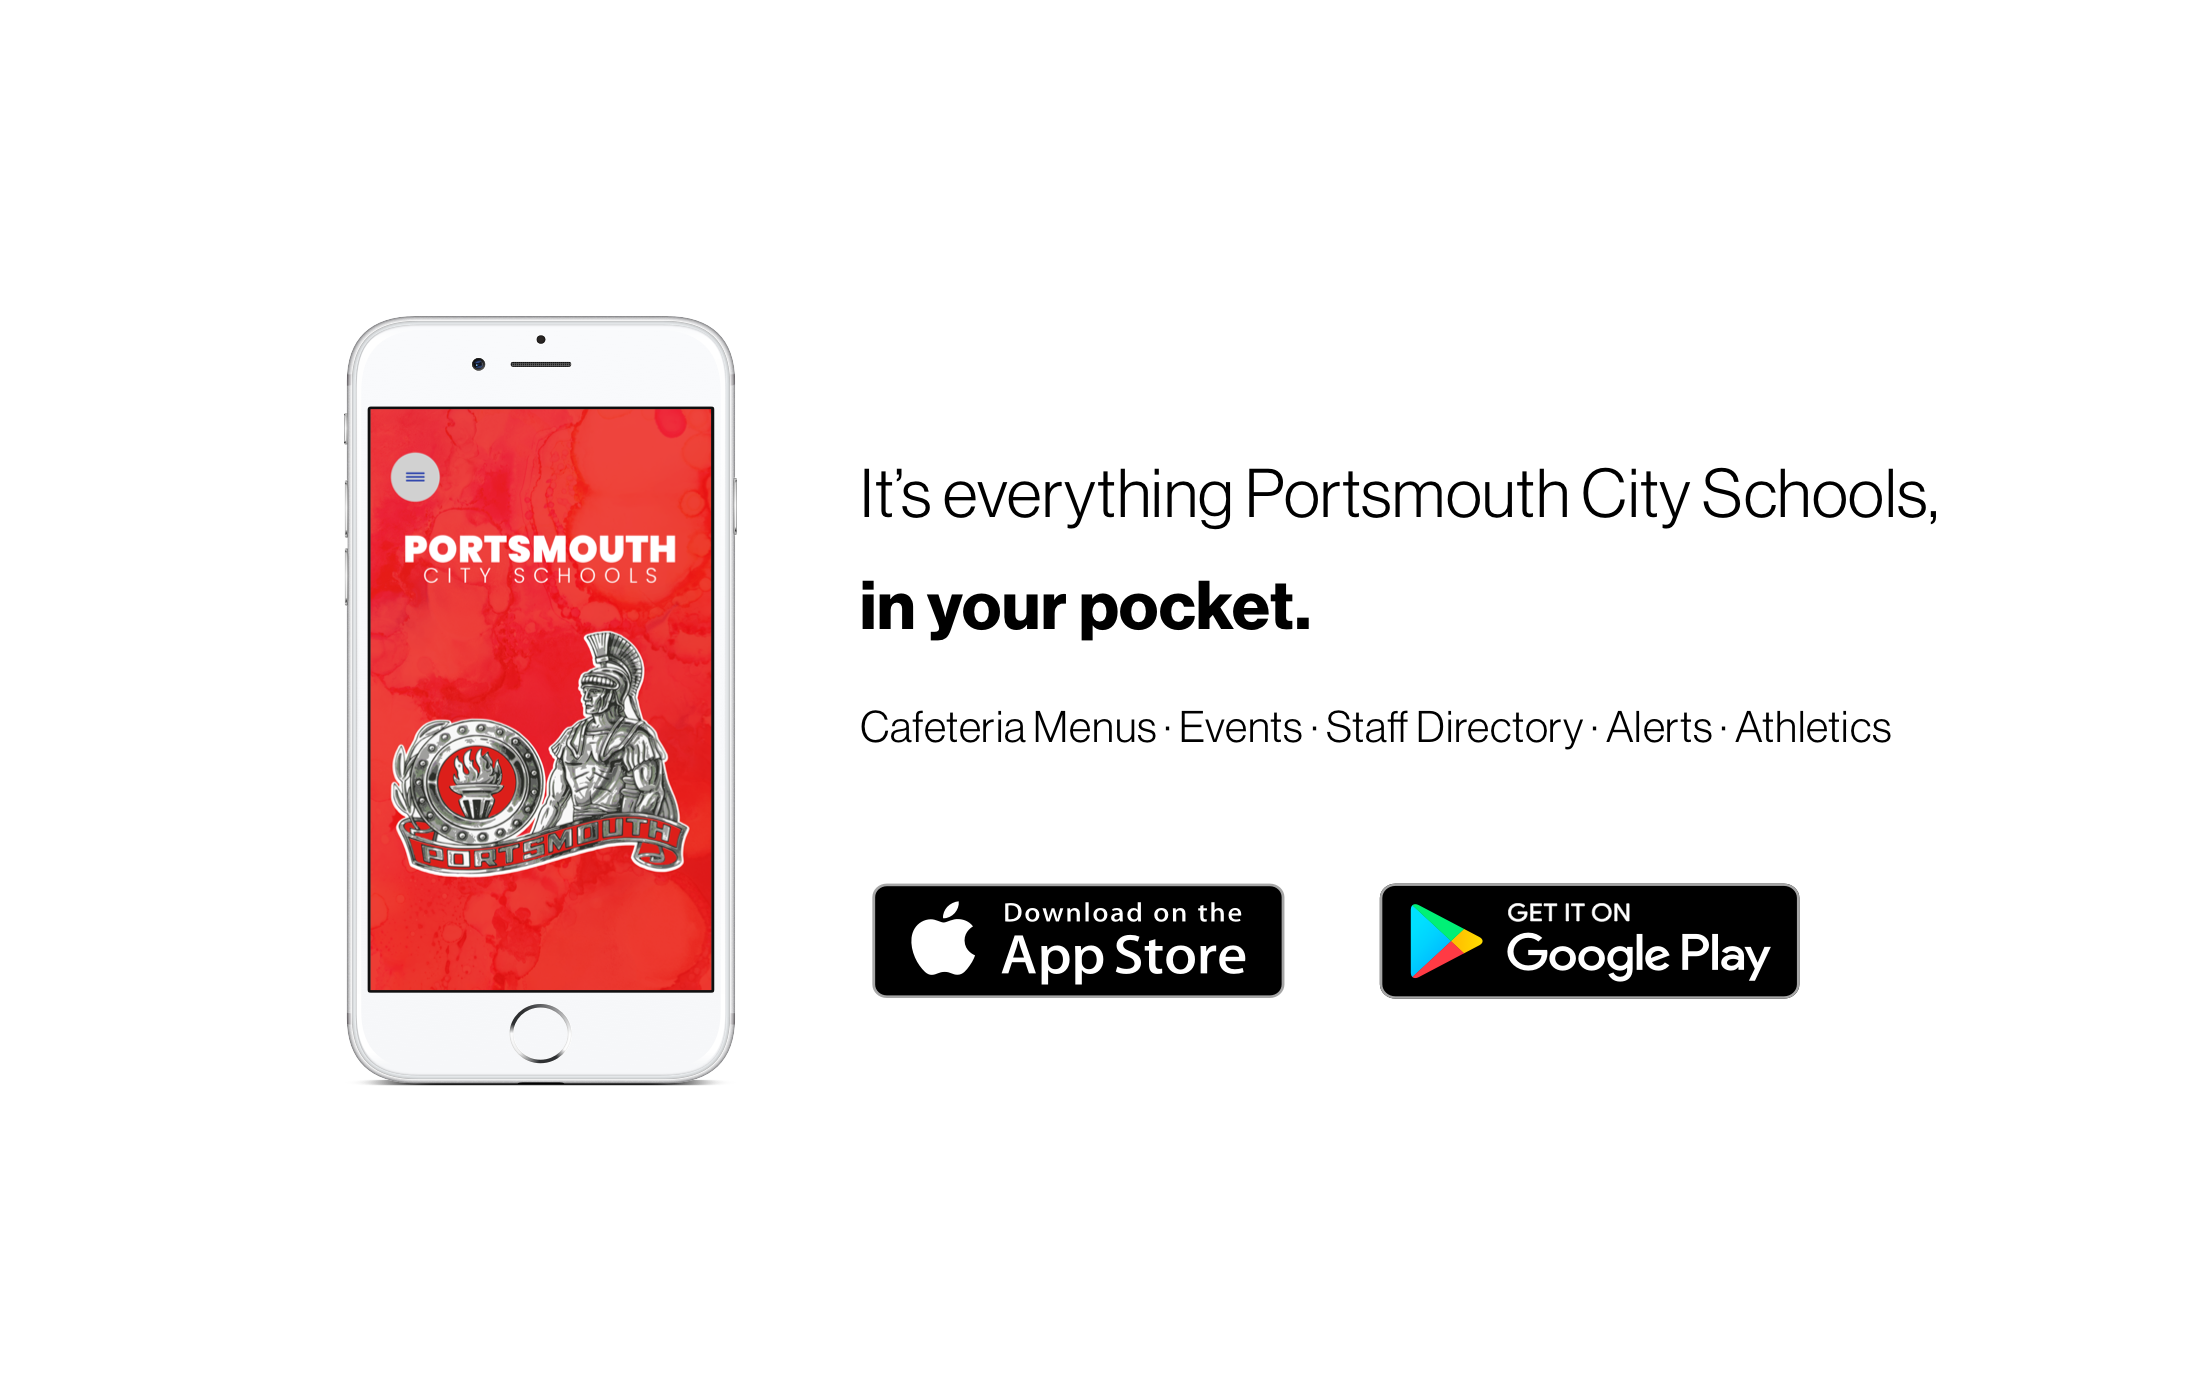 It's everything Portsmouth City Schools, in your pocket.